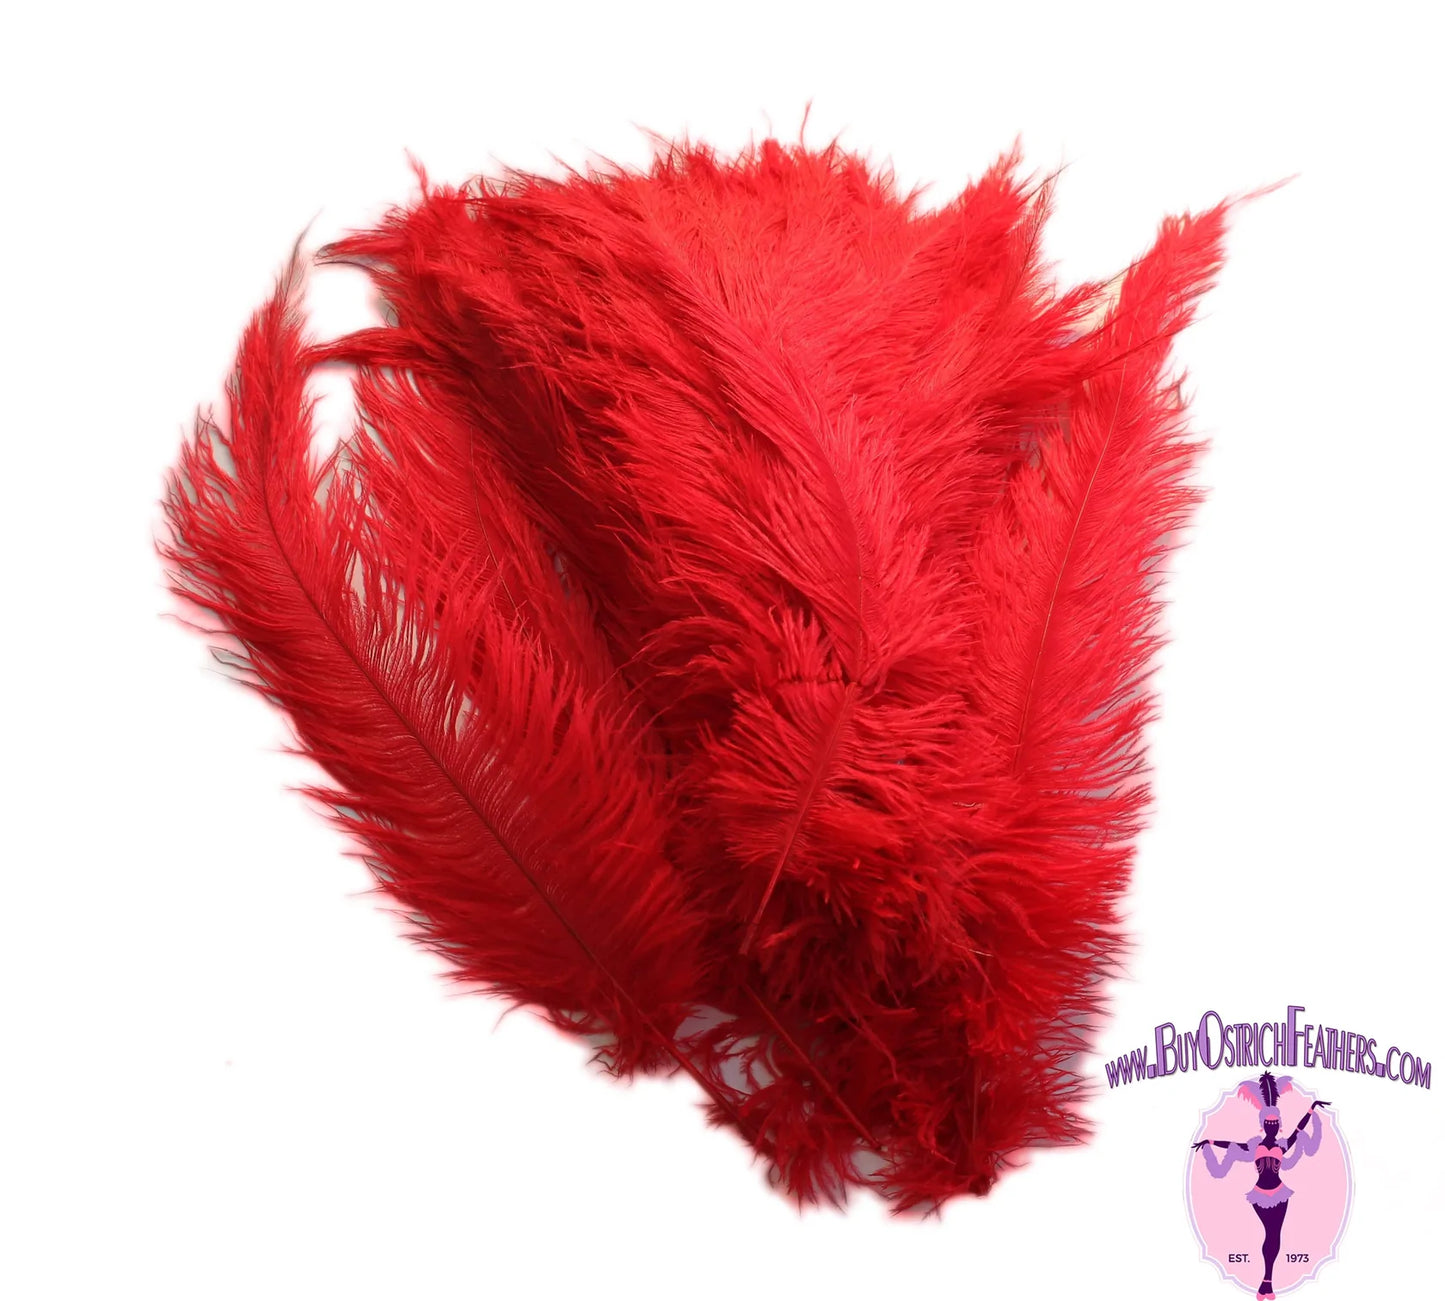 Ostrich Feather Rental 16-20" (Red) - 250pcs - Buy Ostrich Feathers